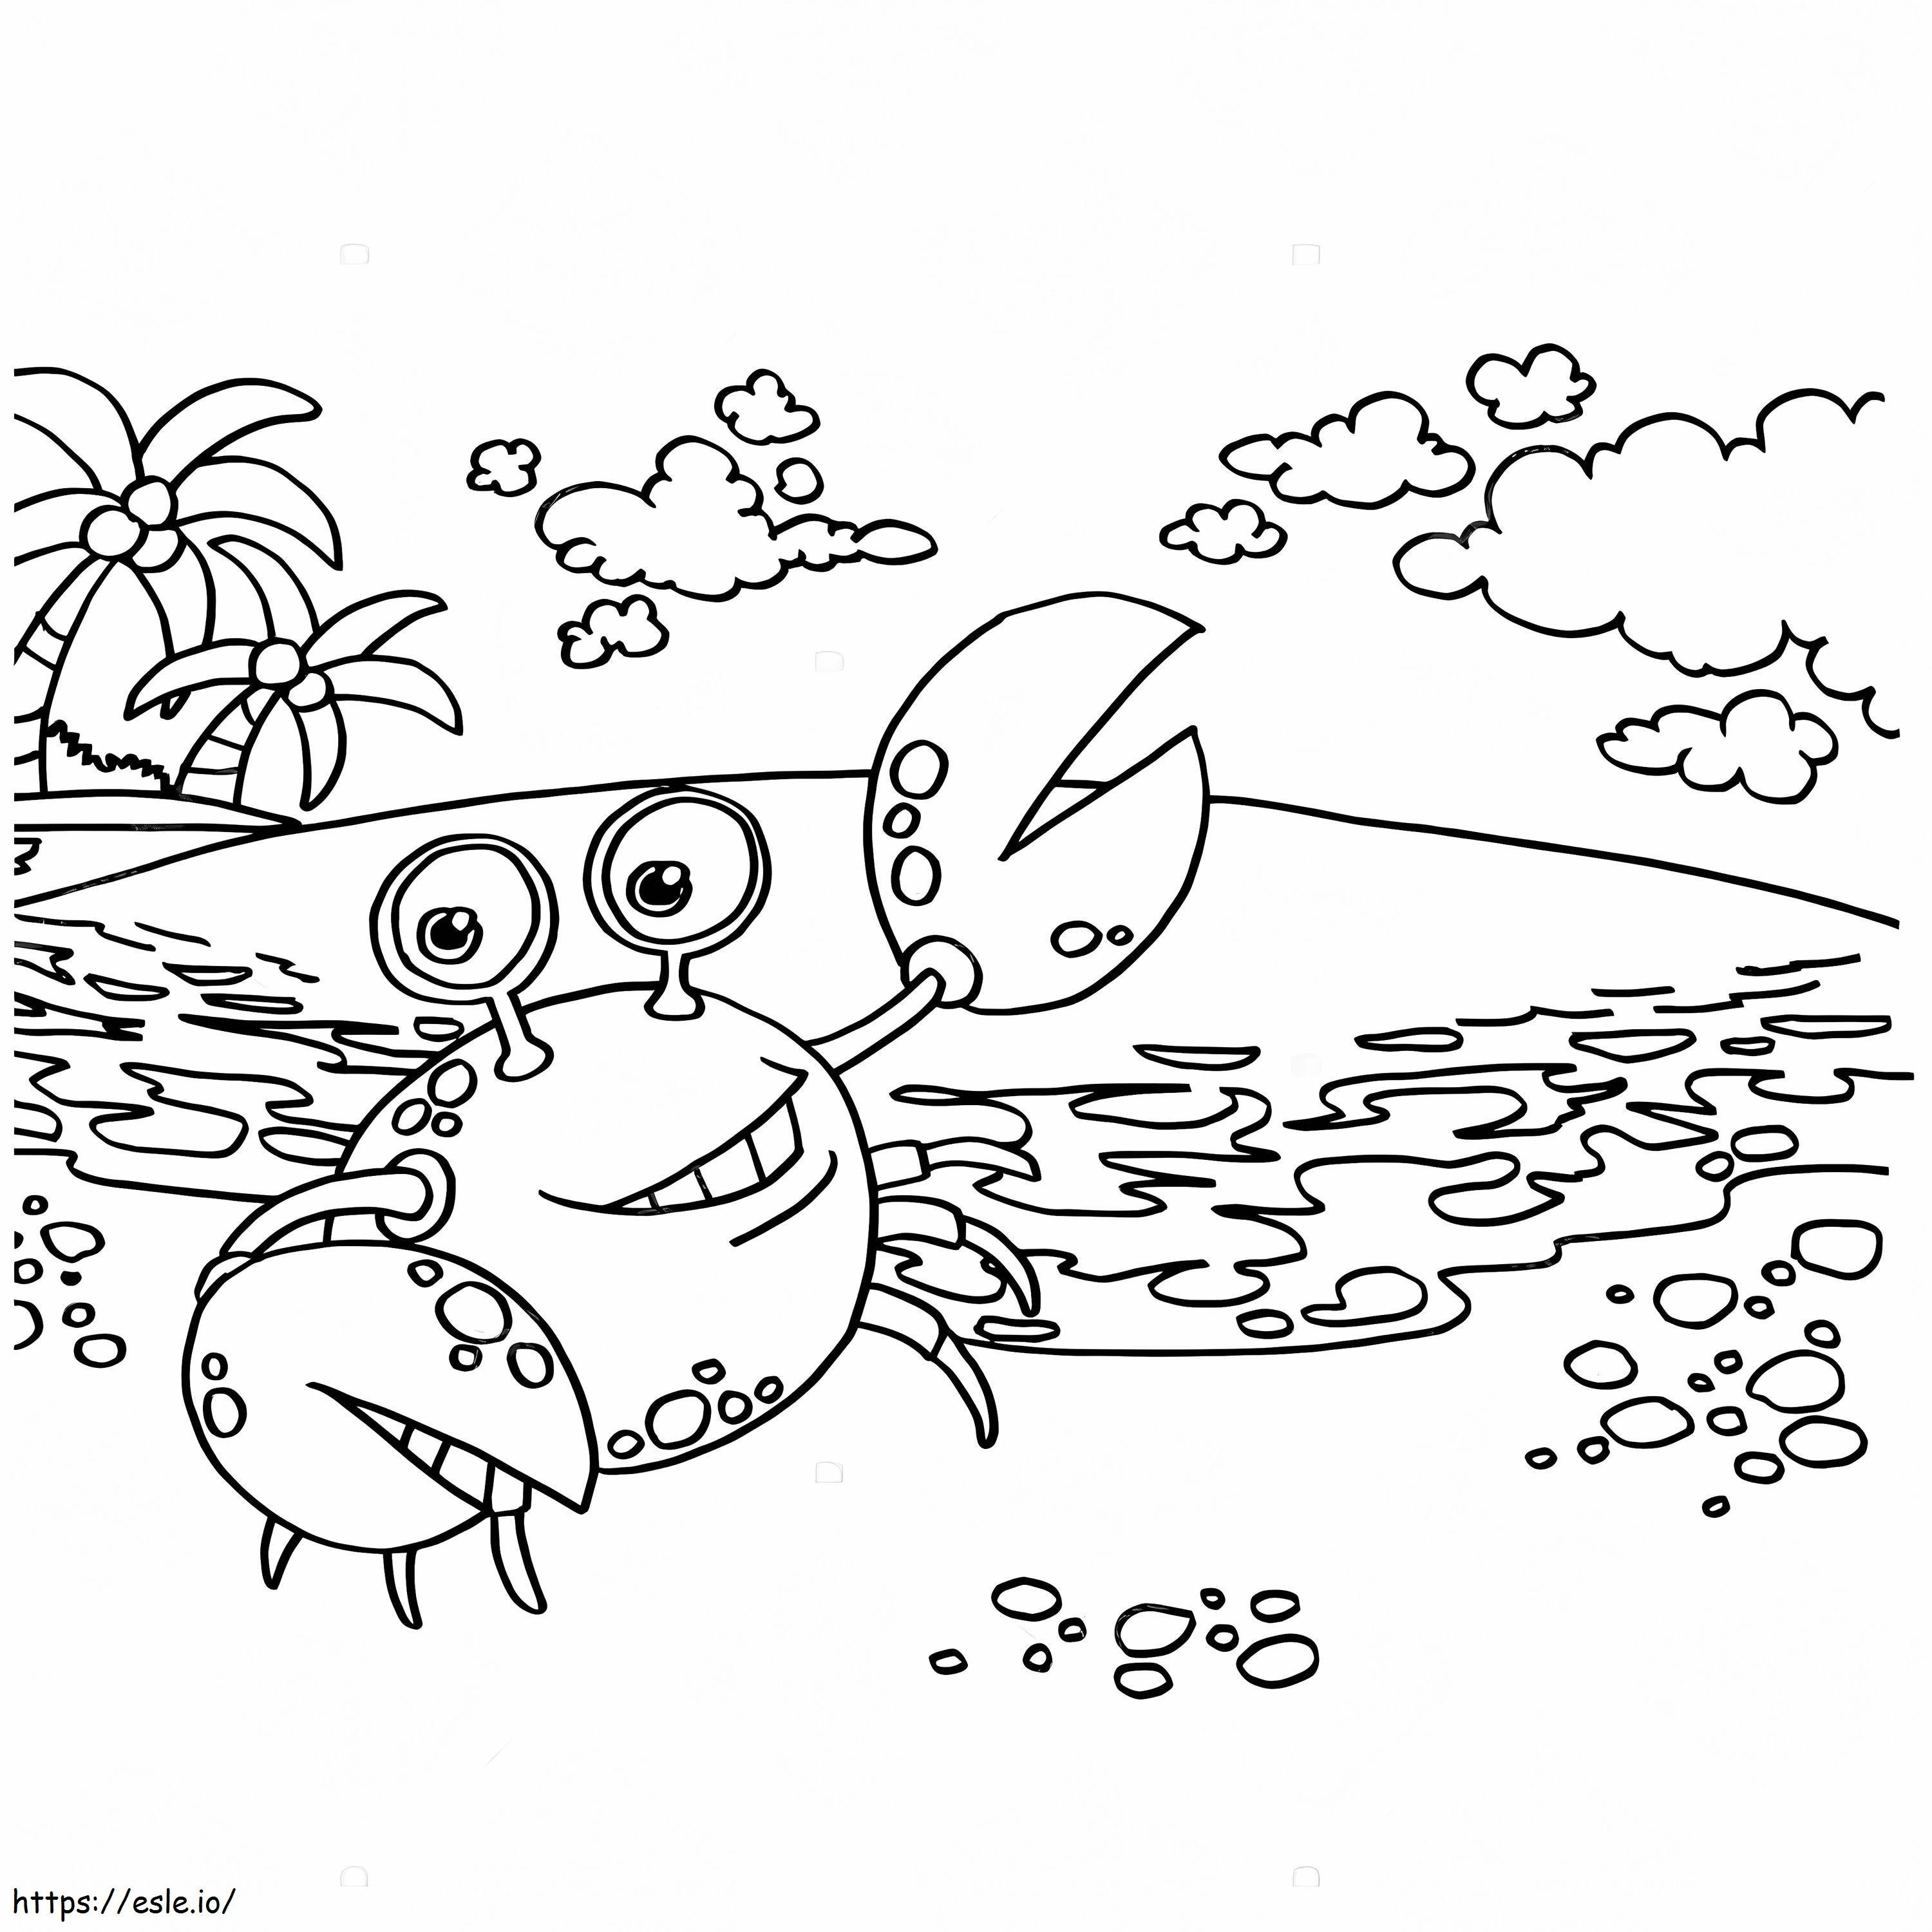 Funny Crab On The Beach coloring page